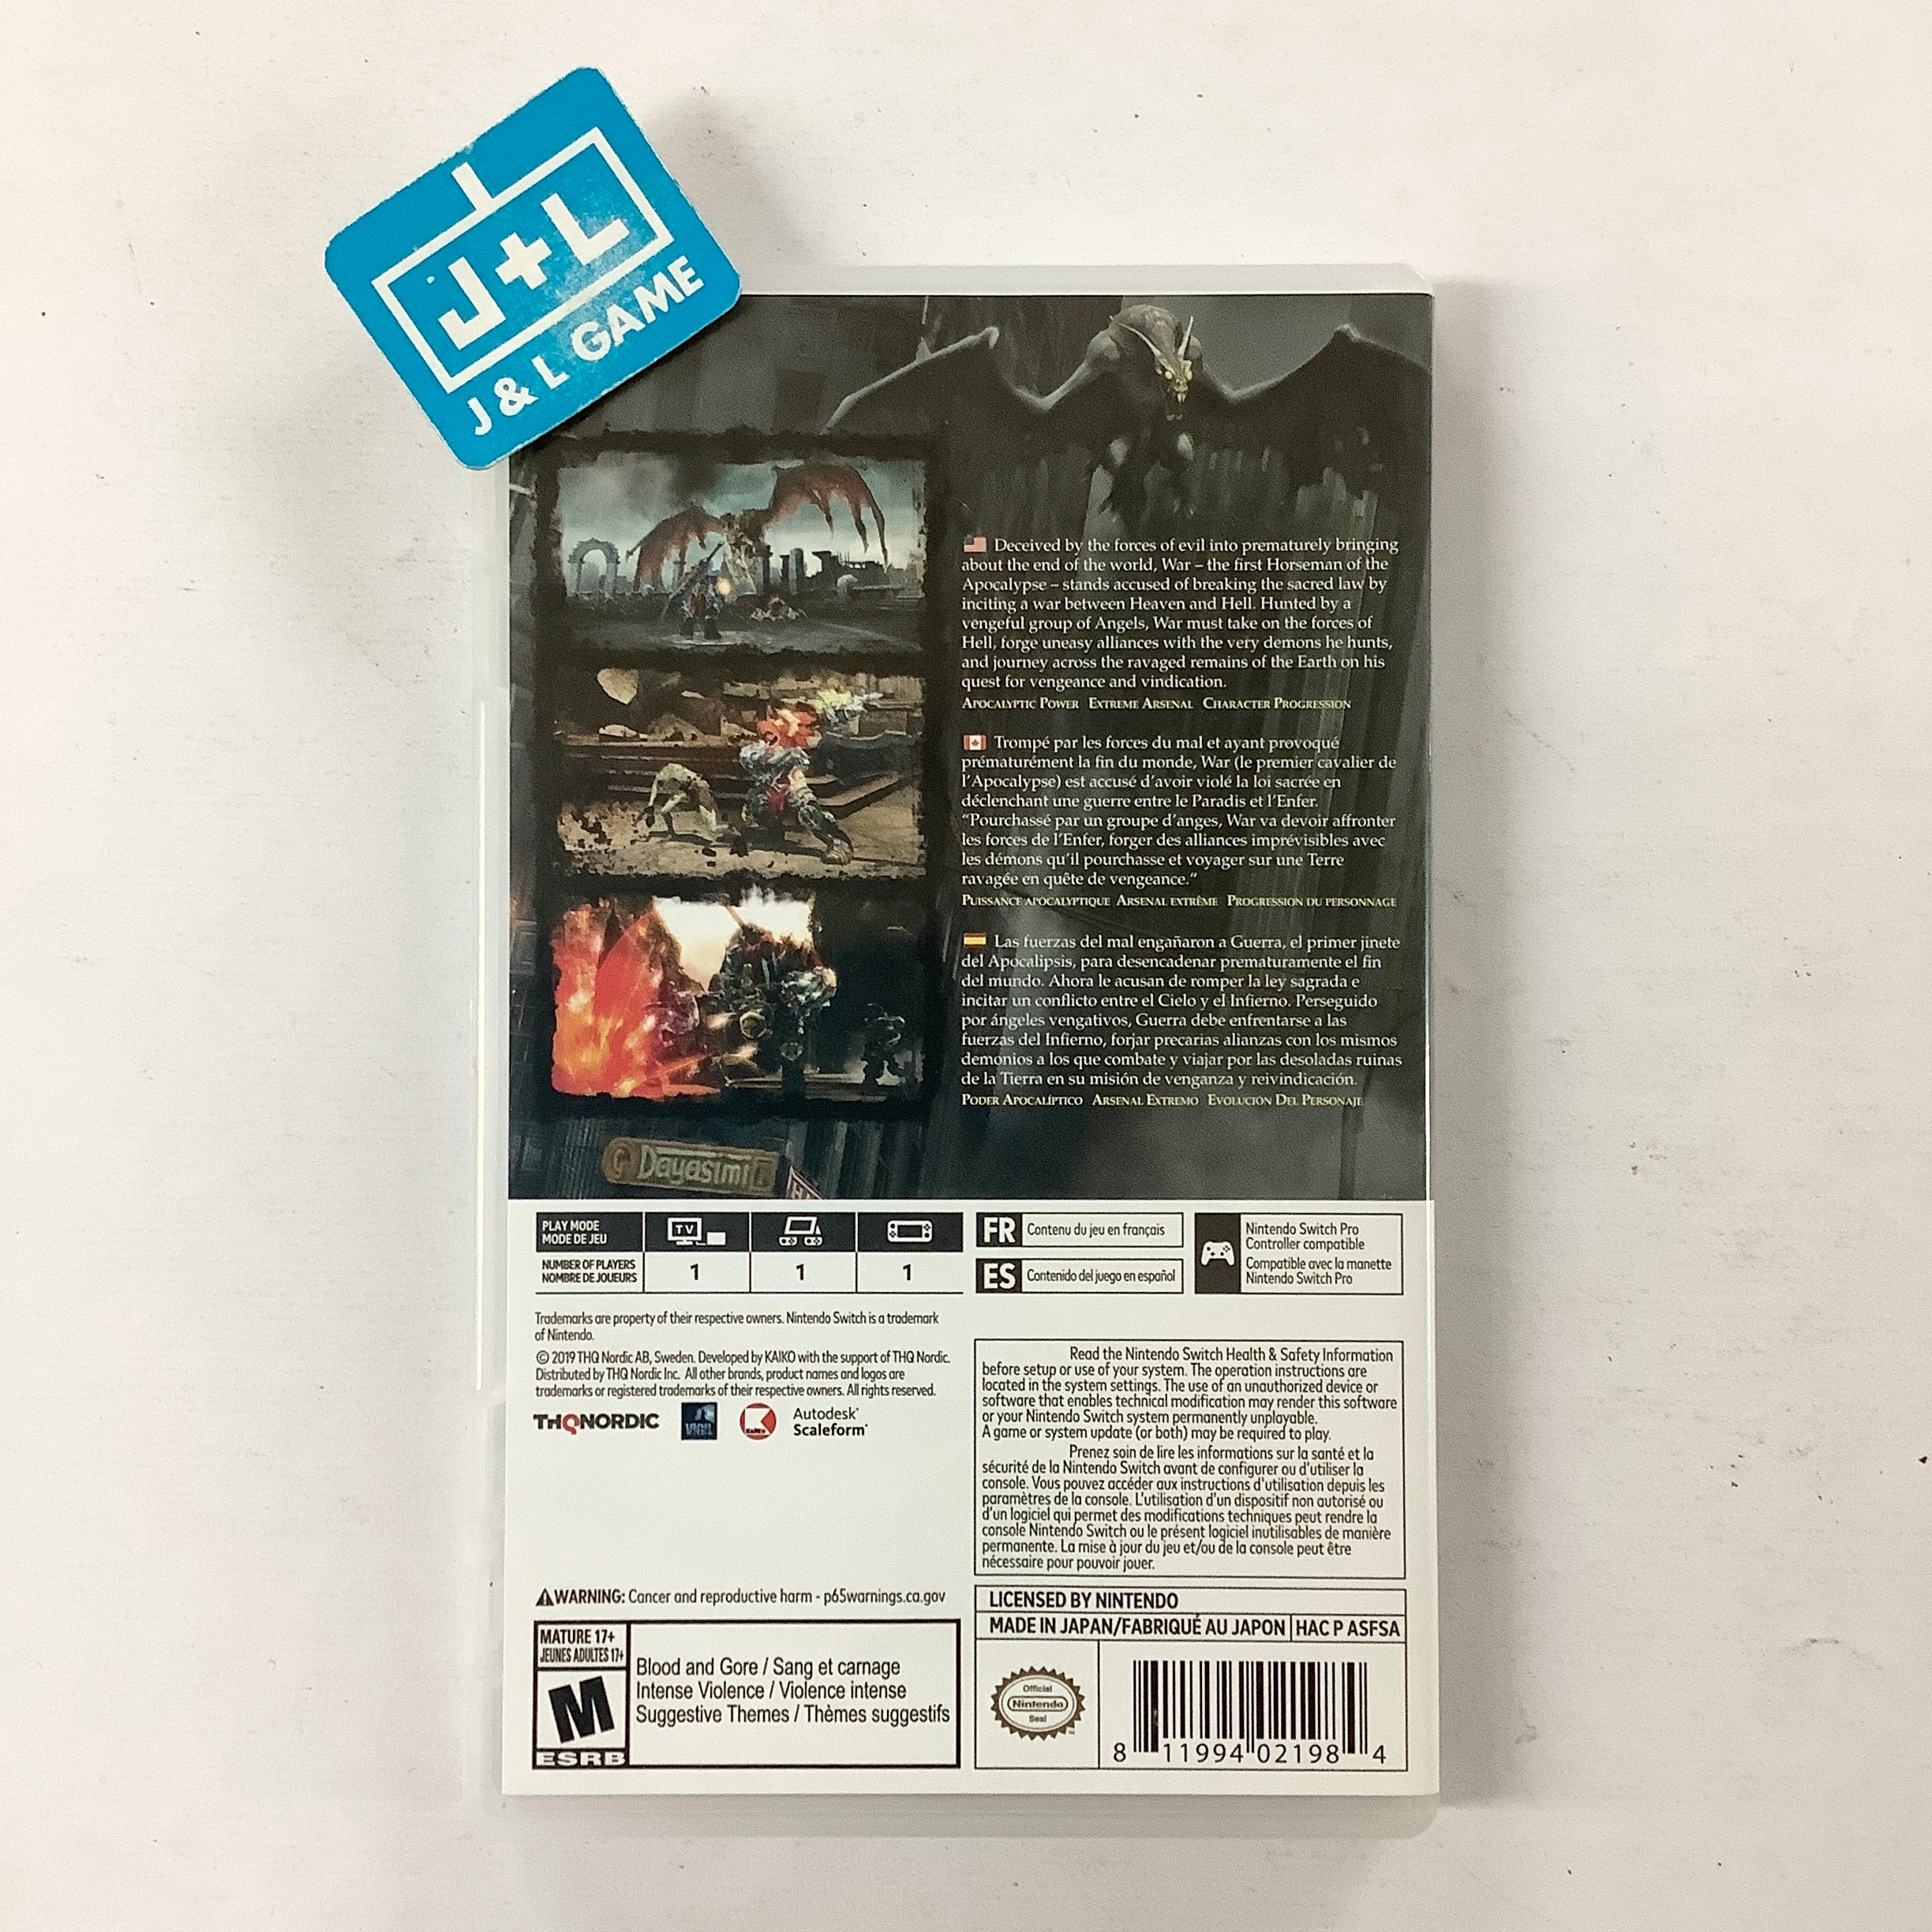 Darksiders: Warmastered Edition (Black Spine) - (NSW) Nintendo Switch [Pre-Owned] Video Games THQ Nordic   